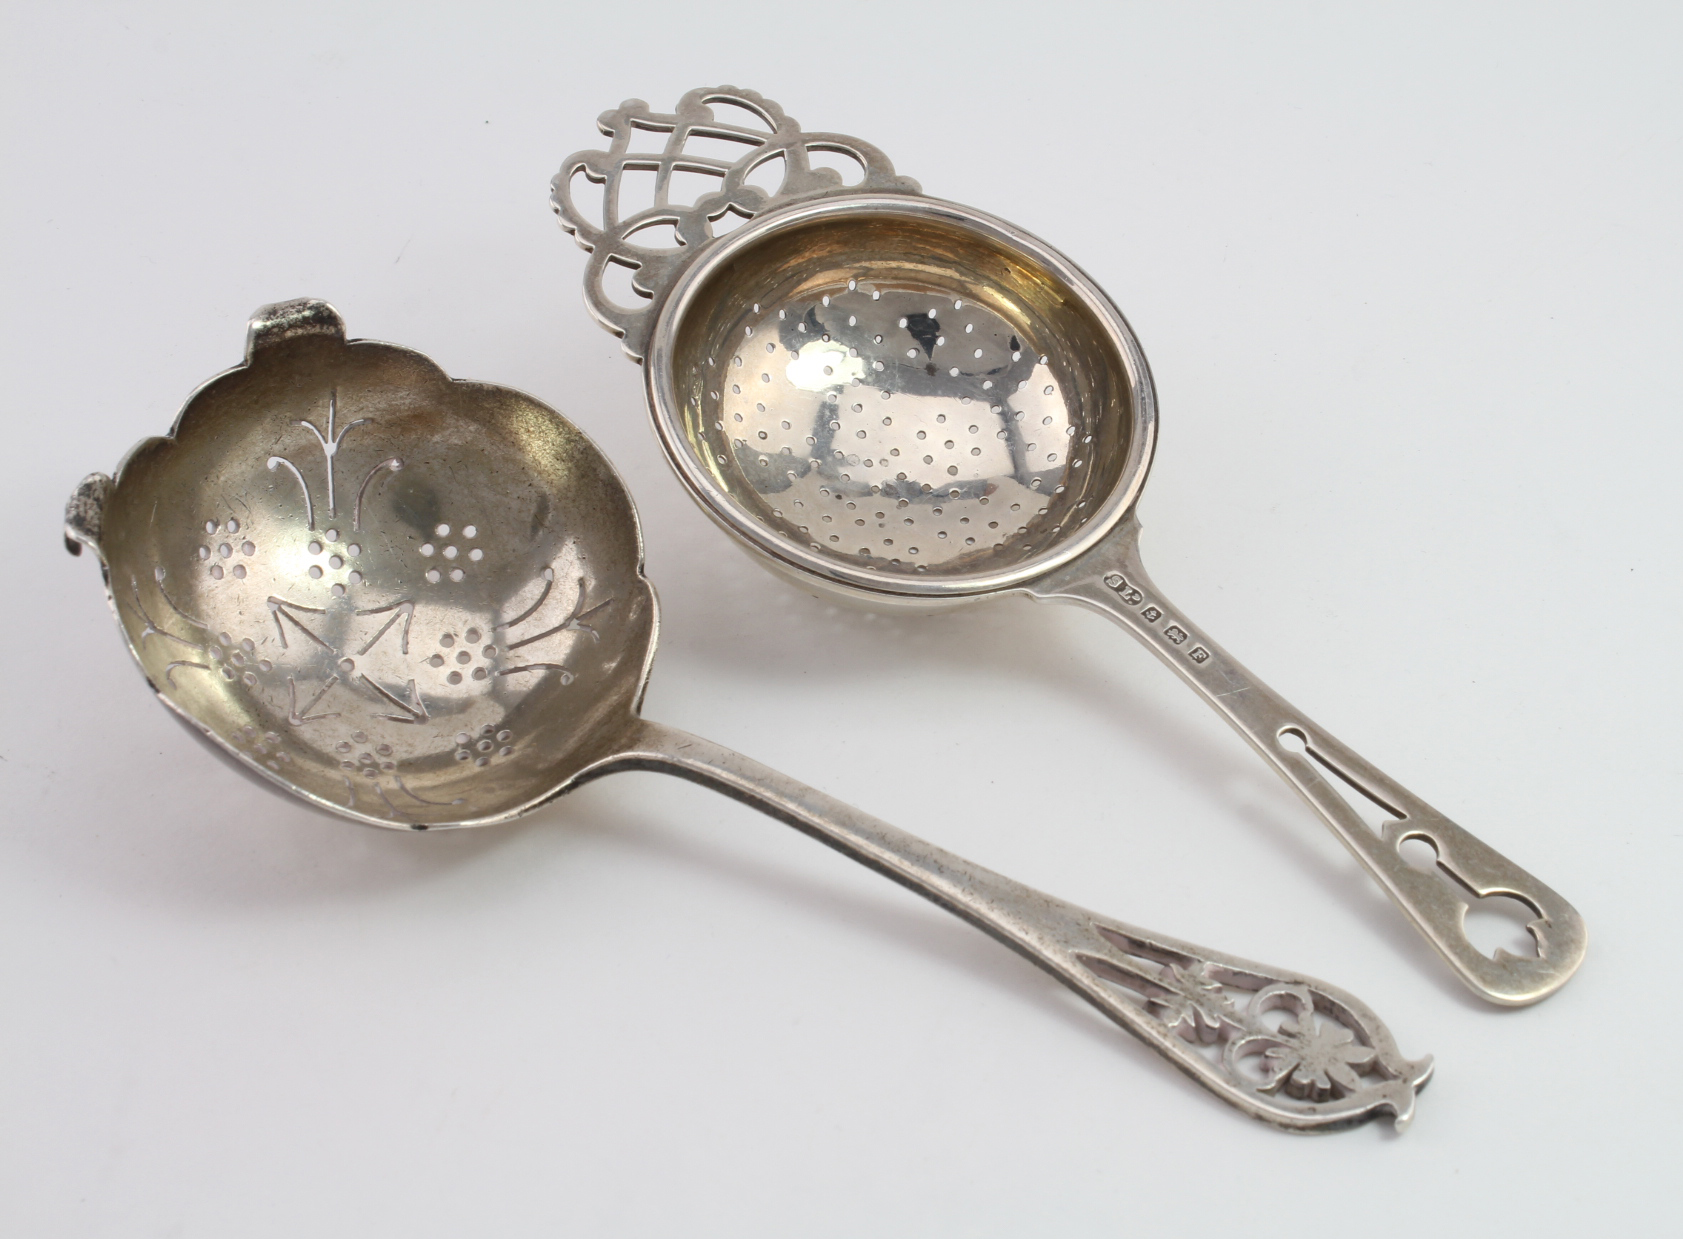 Two silver Tea Strainers hallmarked for Sheffield 1955 and Birmingham 1949. Weight 2¾ oz